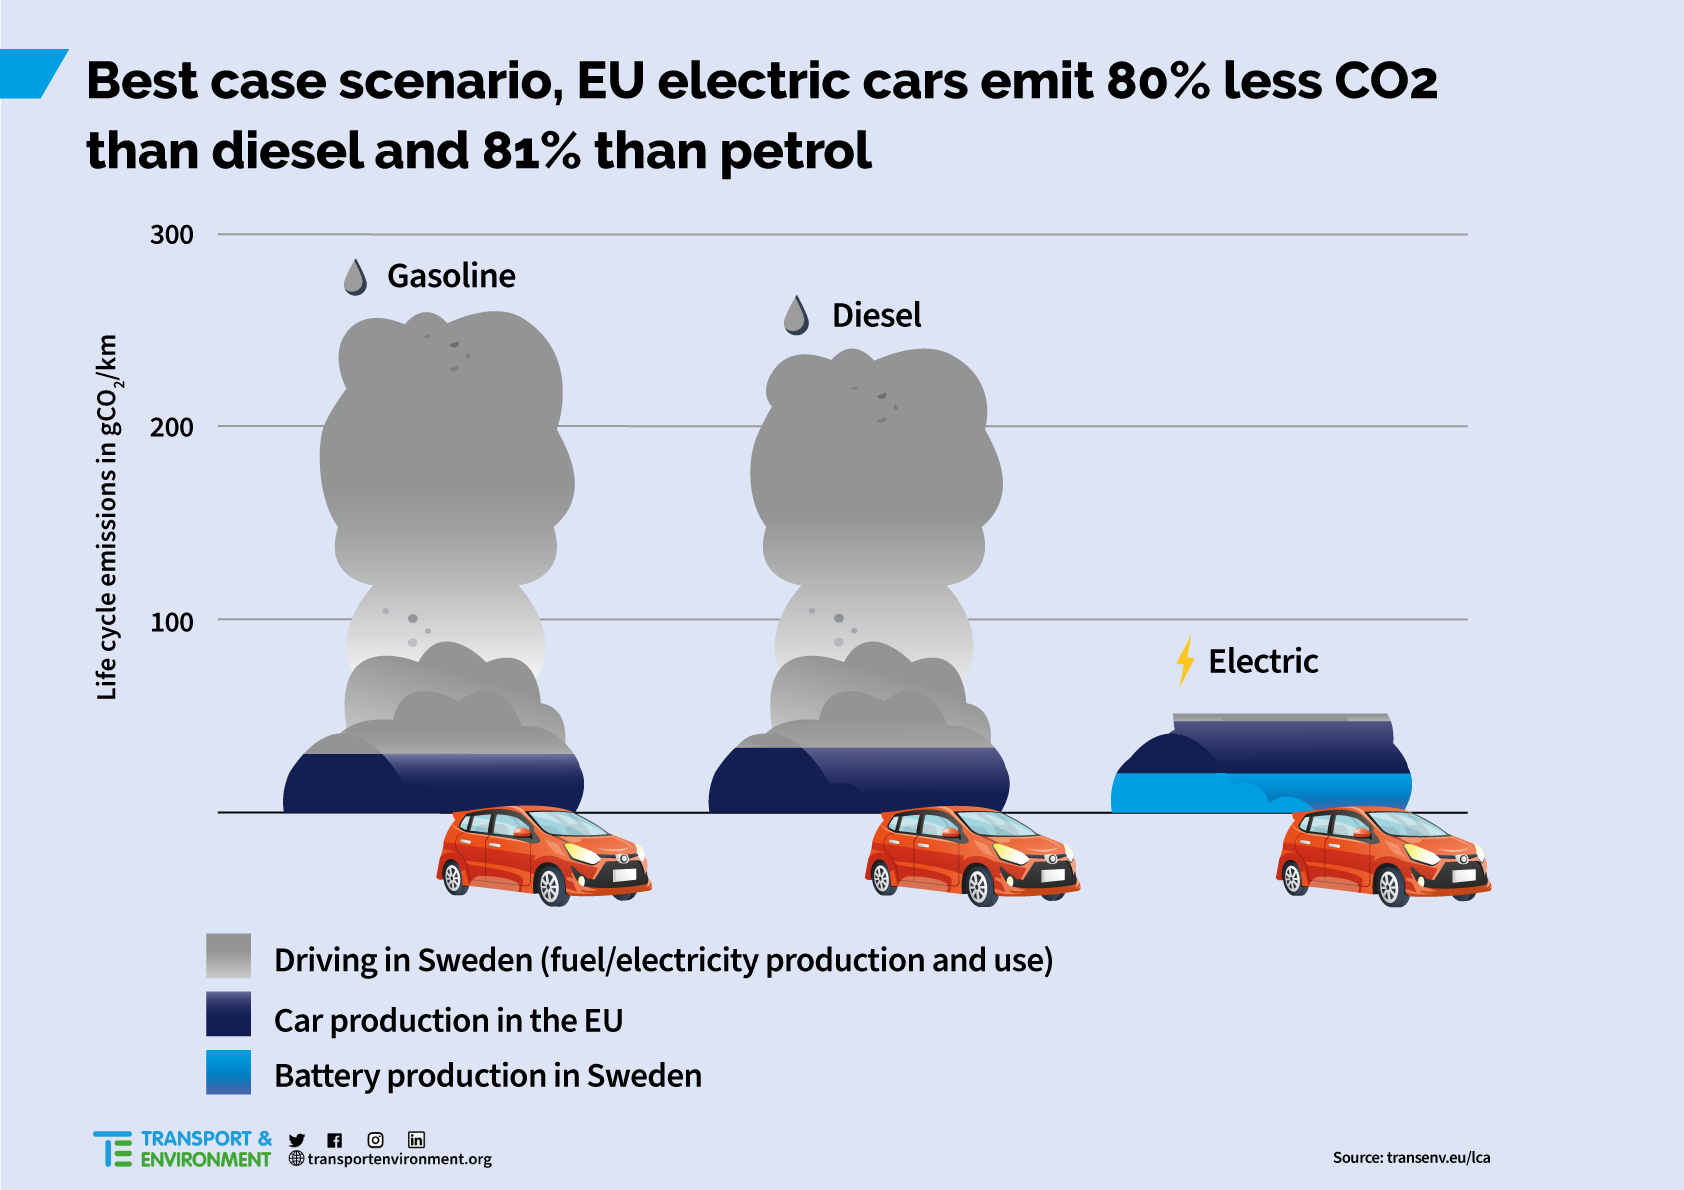 E21NS Does an electric vehicle emit less than a petrol or diesel?